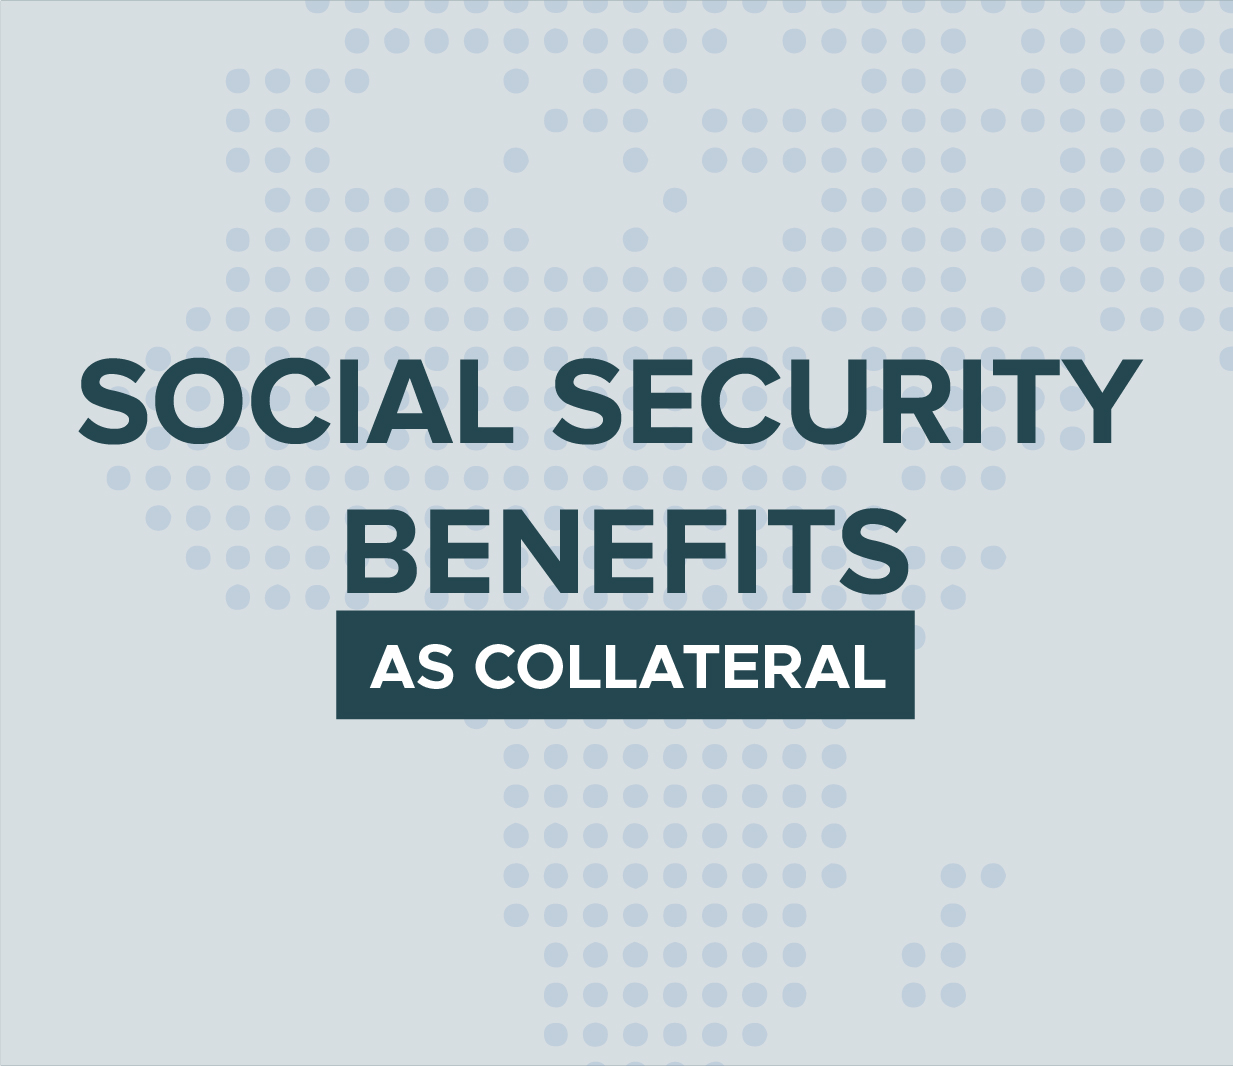 Highlight of the new issued regulations on the use of social security benefits as a collateral for home mortgage.